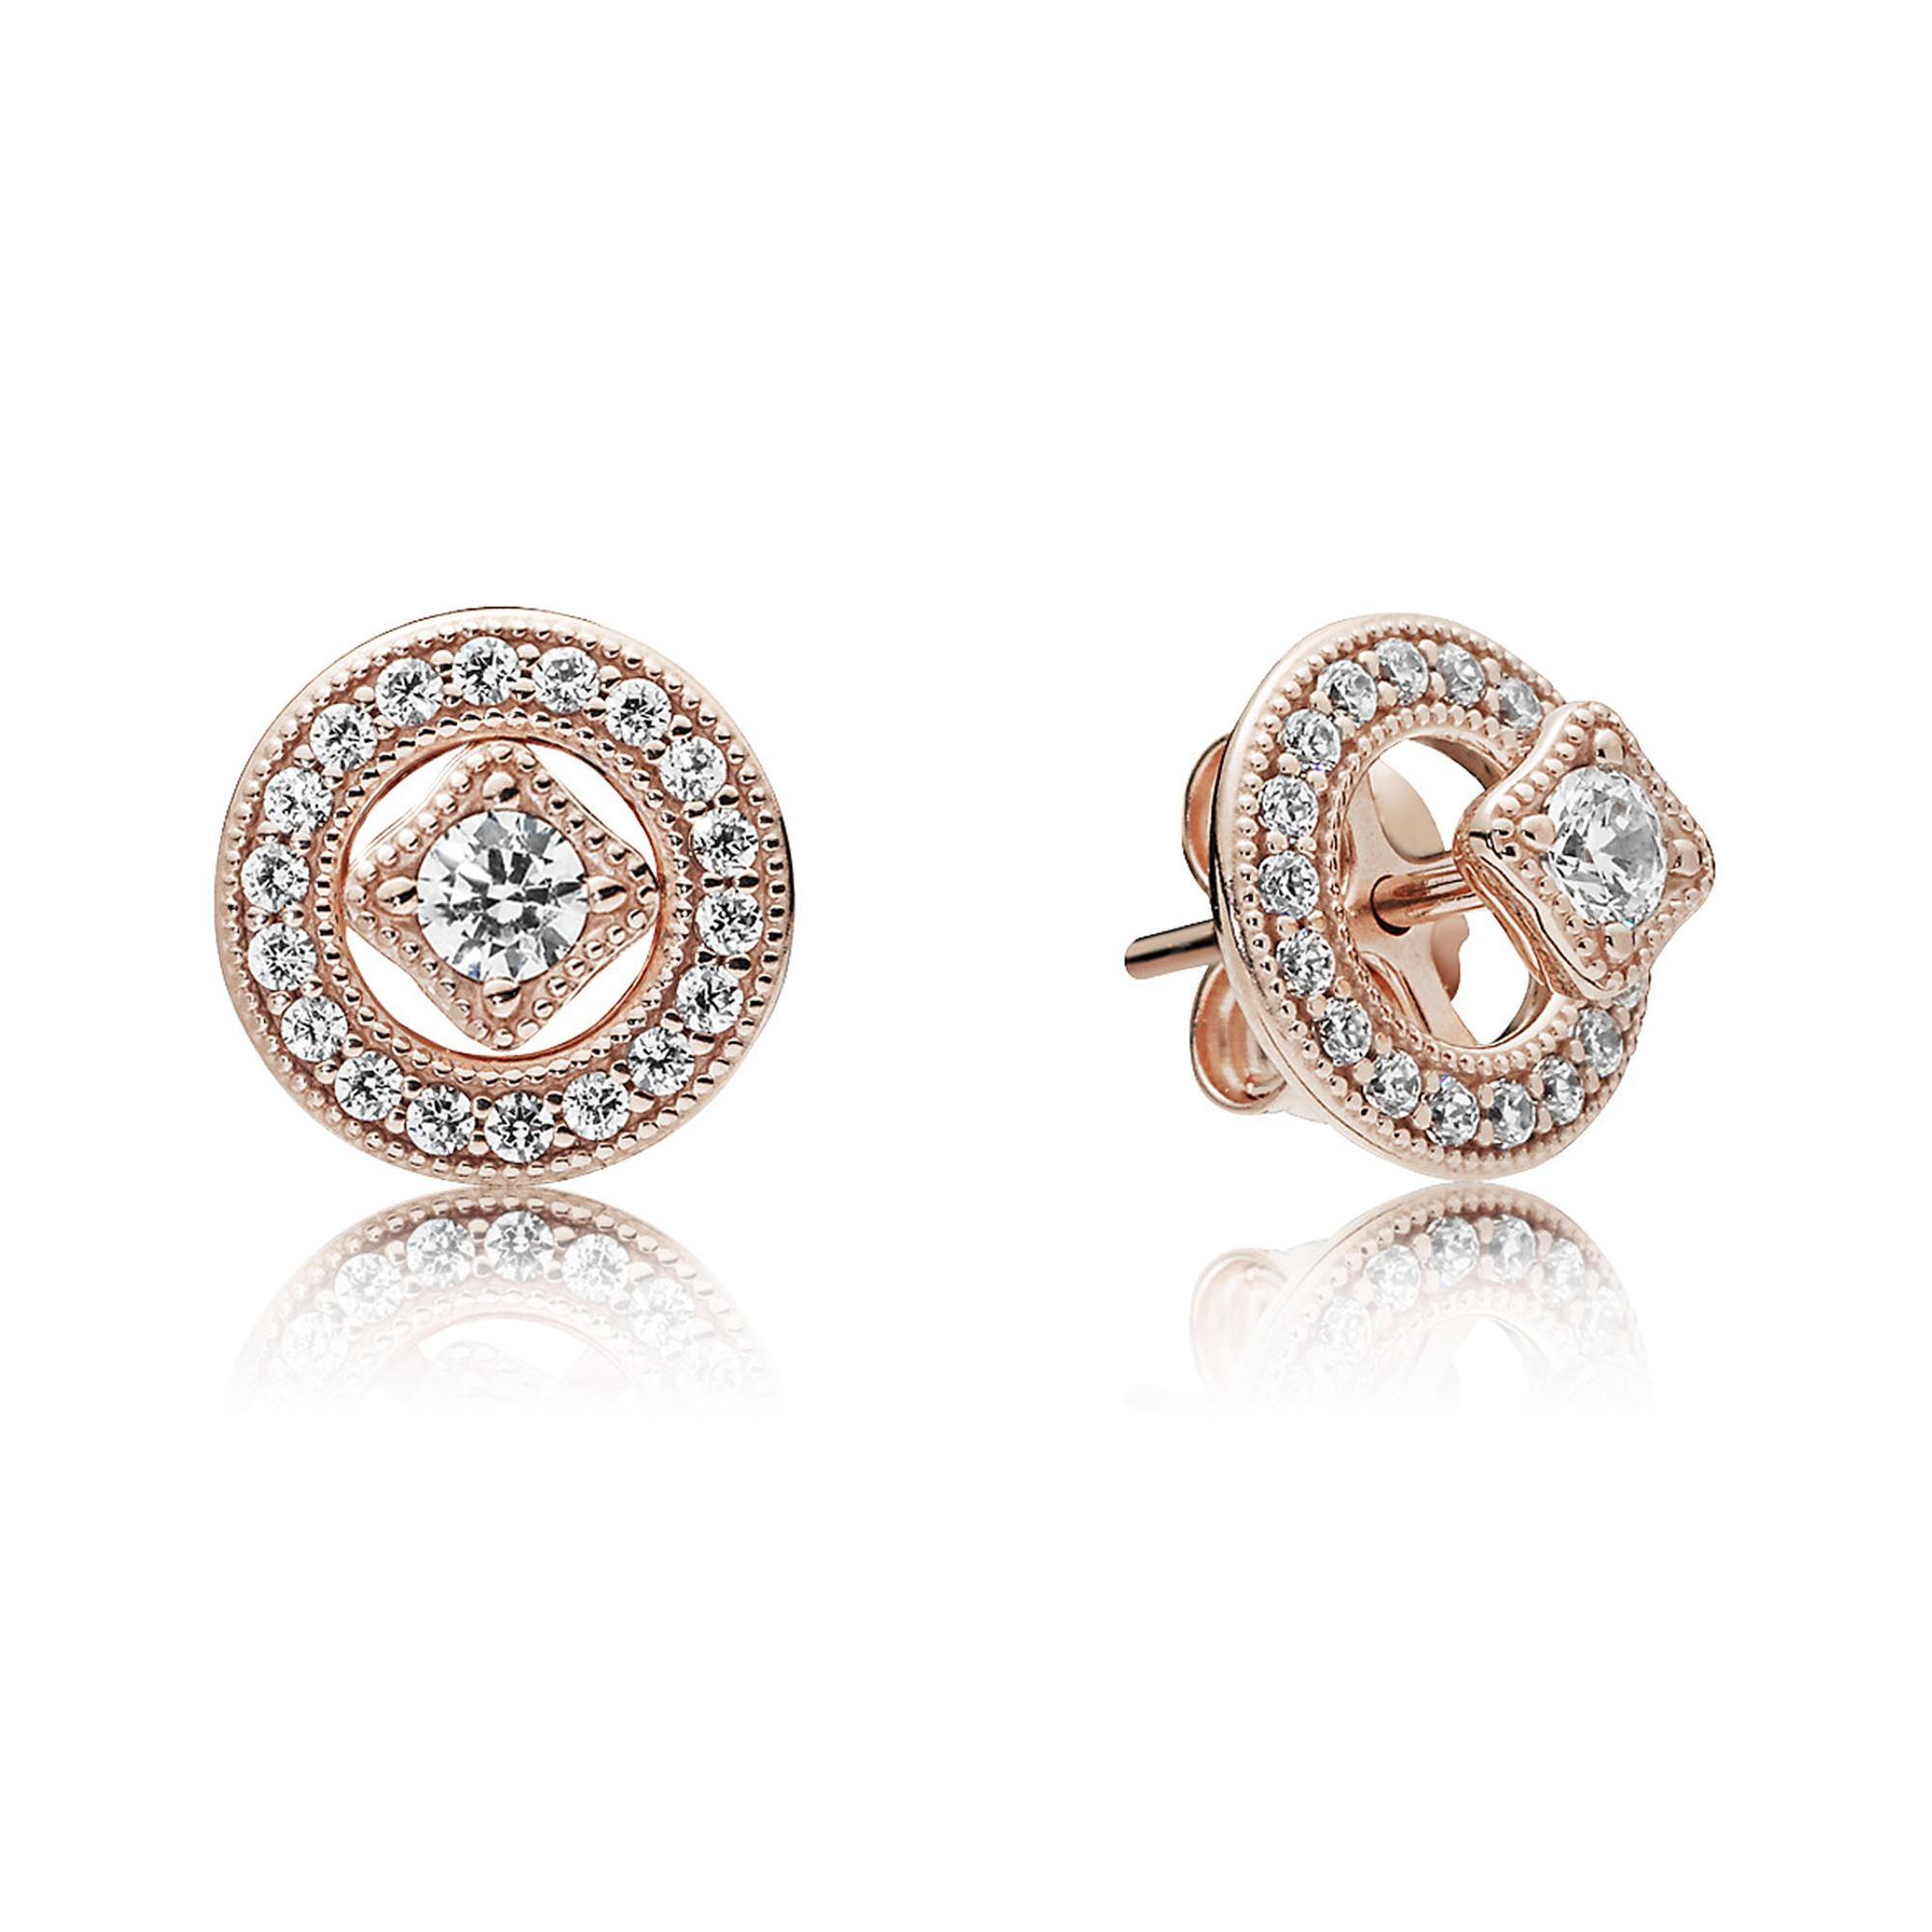 Pandora Vintage Allure Earrings, Clear Cubic Zirconia, Rose Gold-Plated